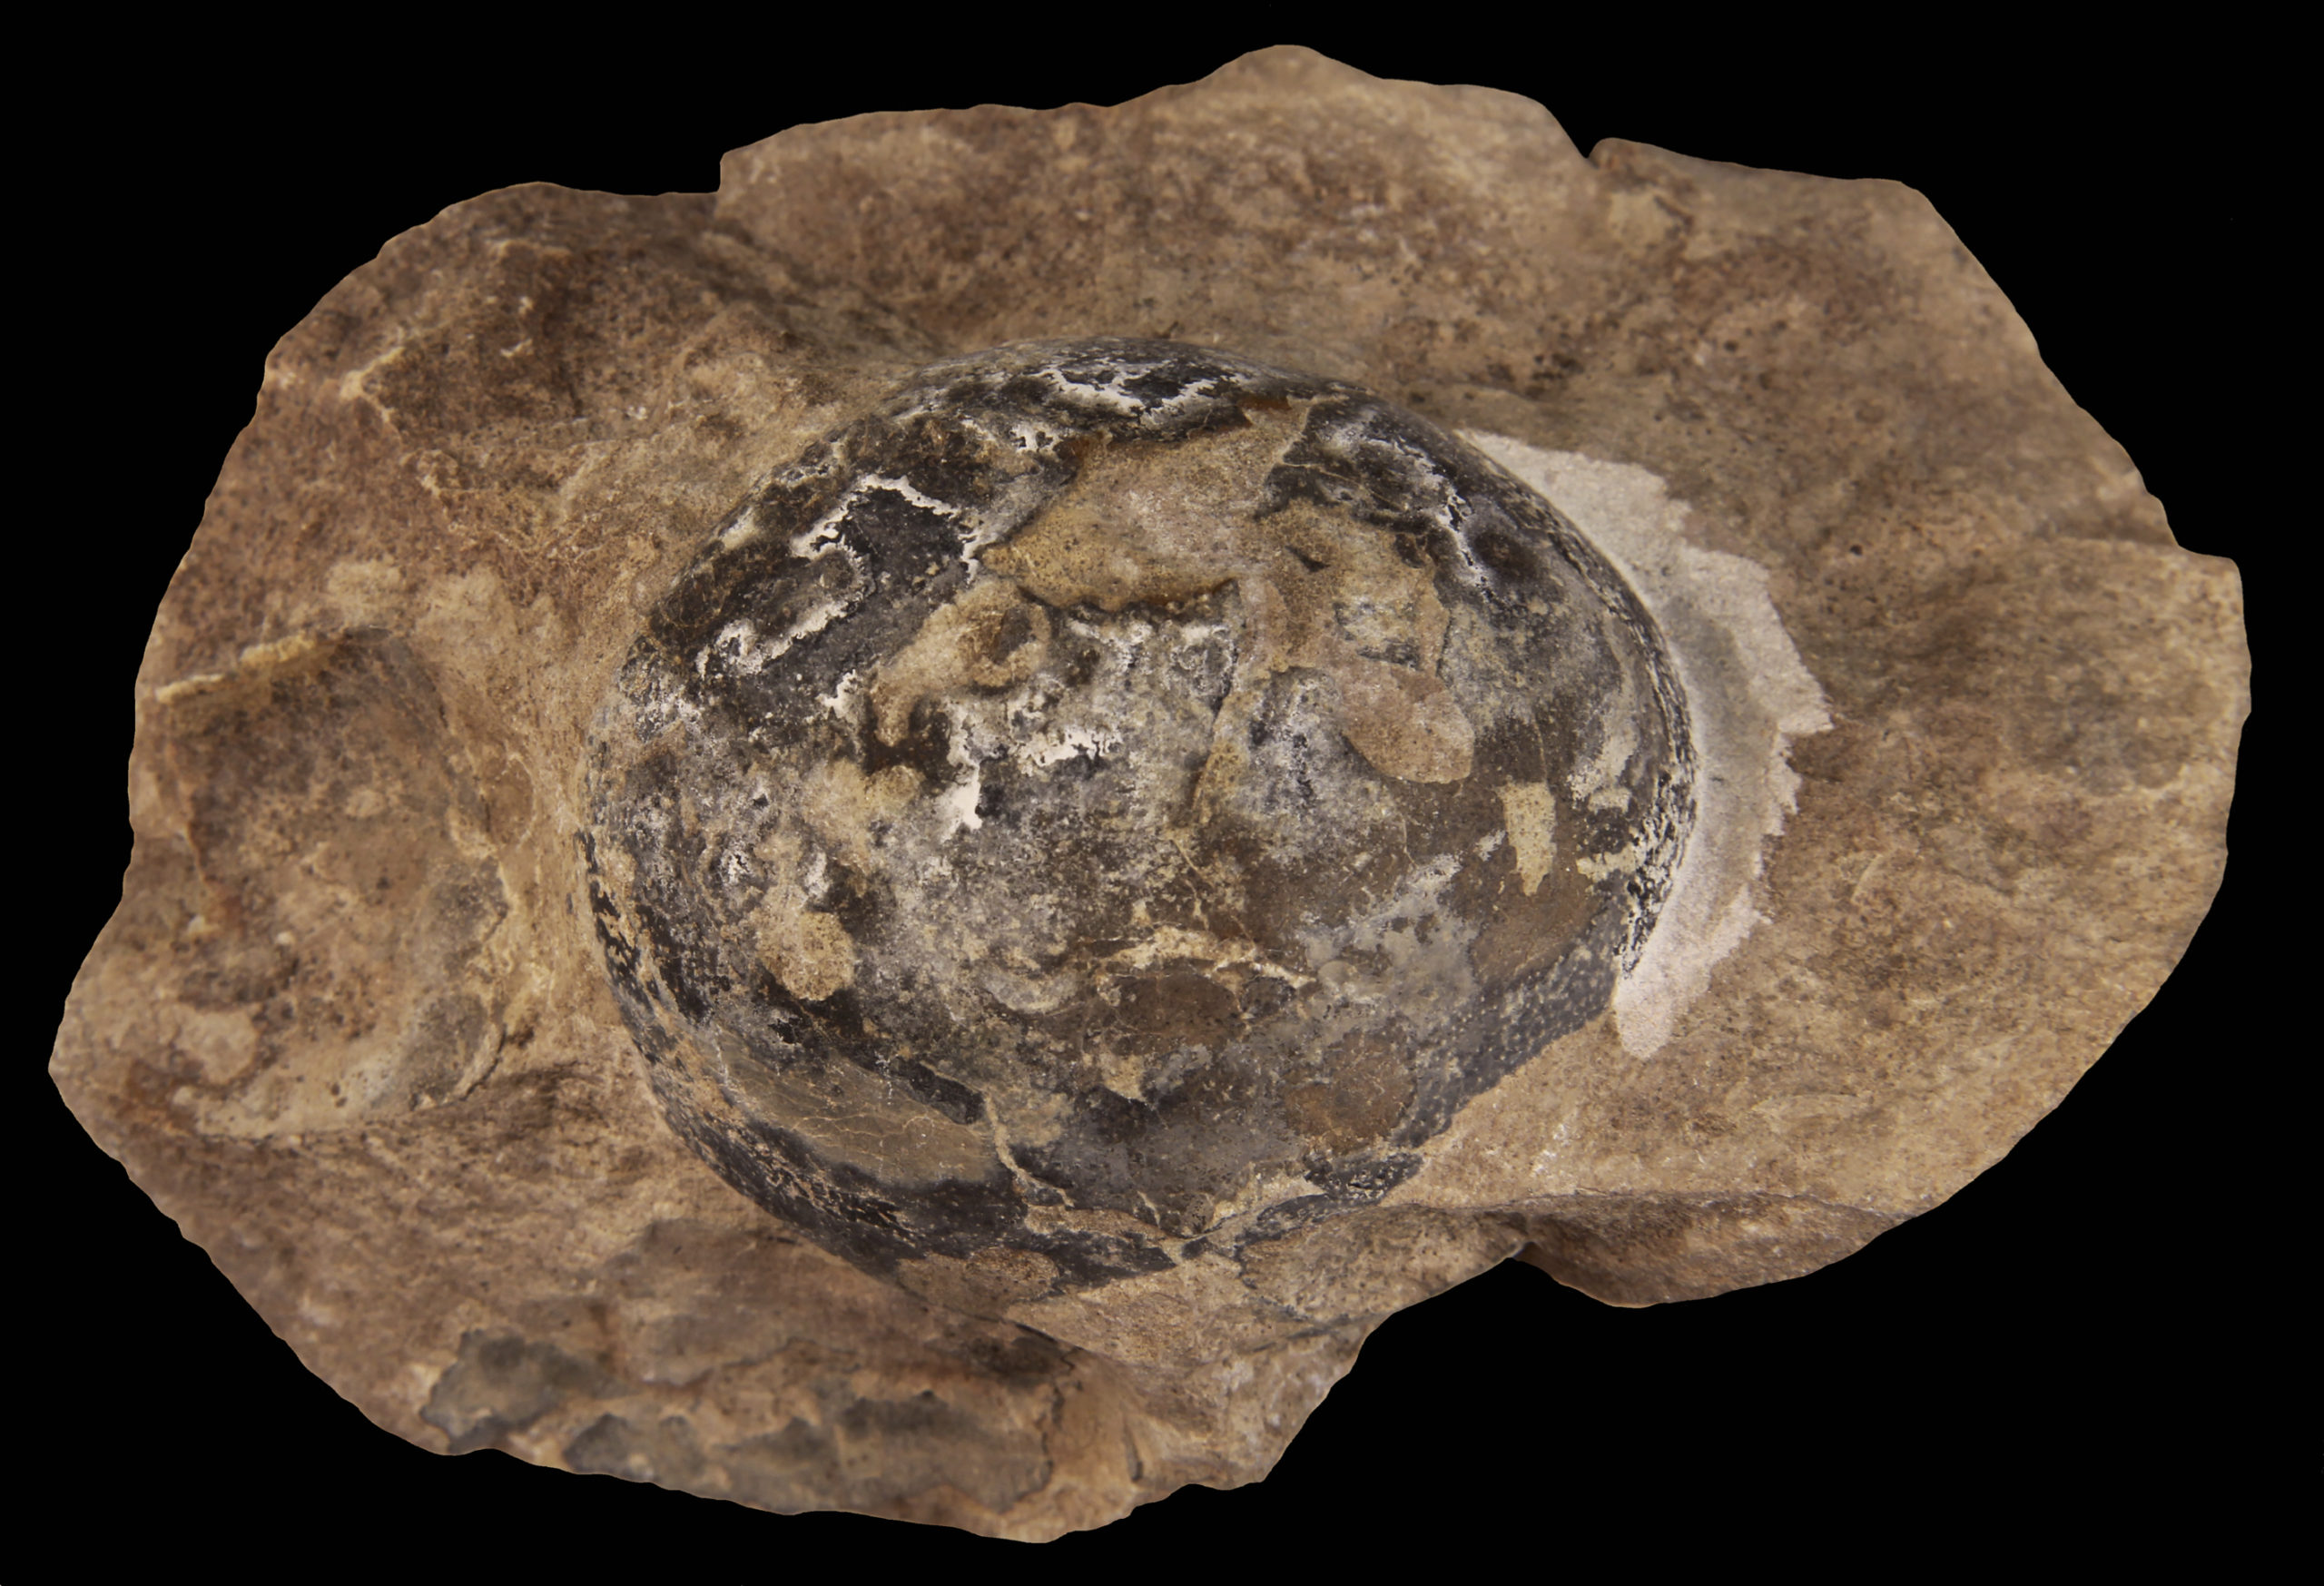 Fossilized Mussaurus egg. (Image: D. Pol)